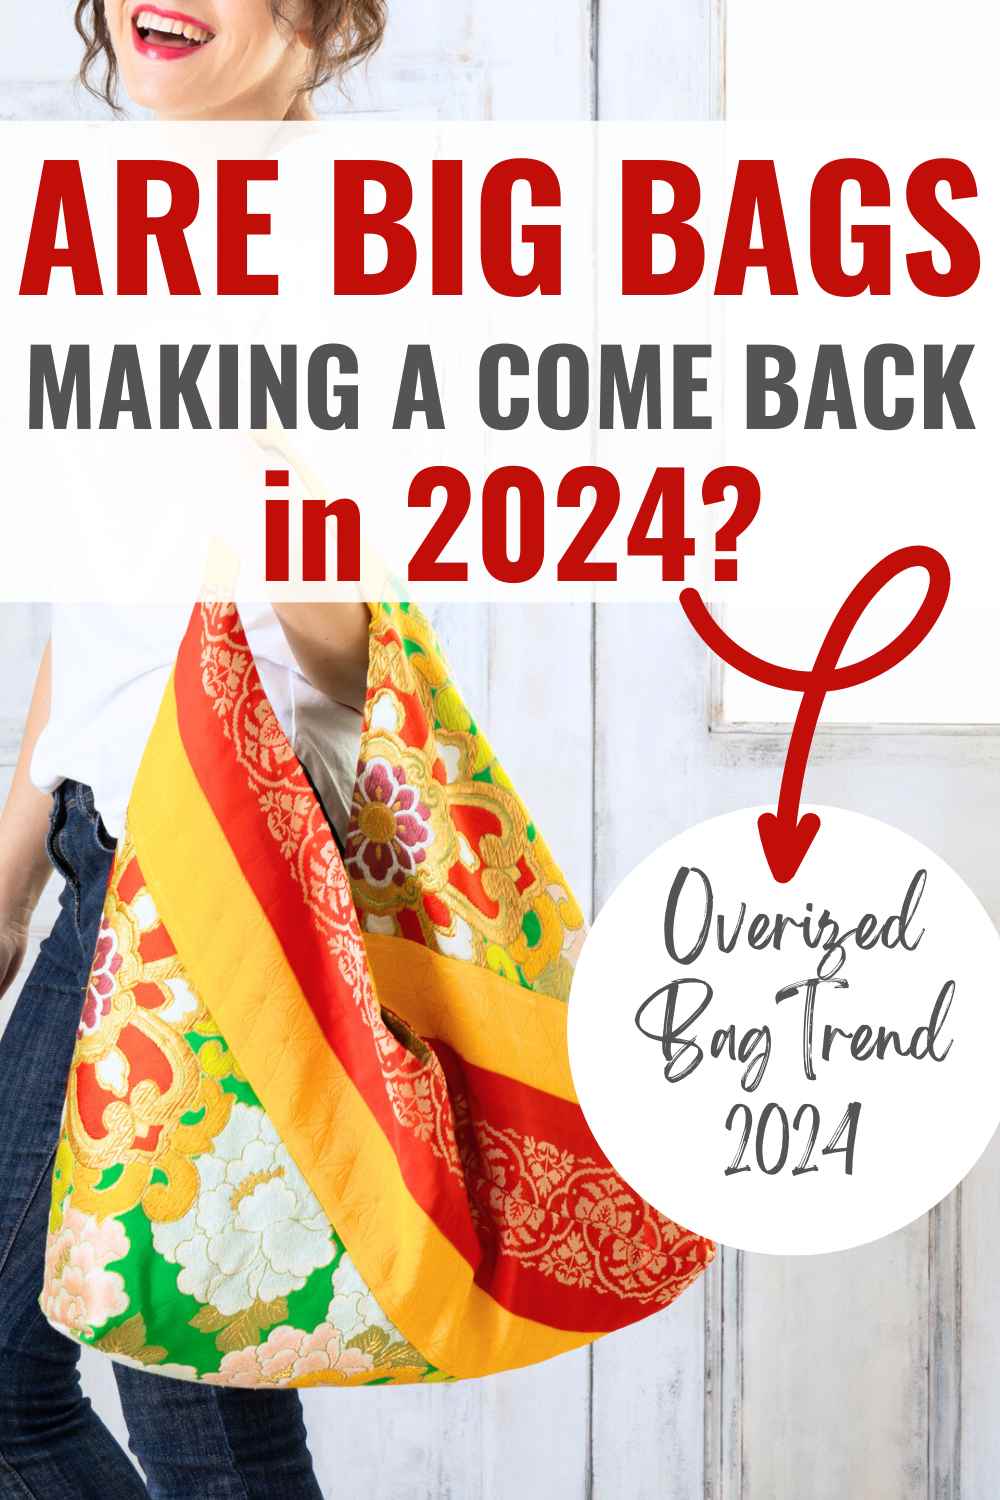 Are Big Bags Making A Comeback in 2024?